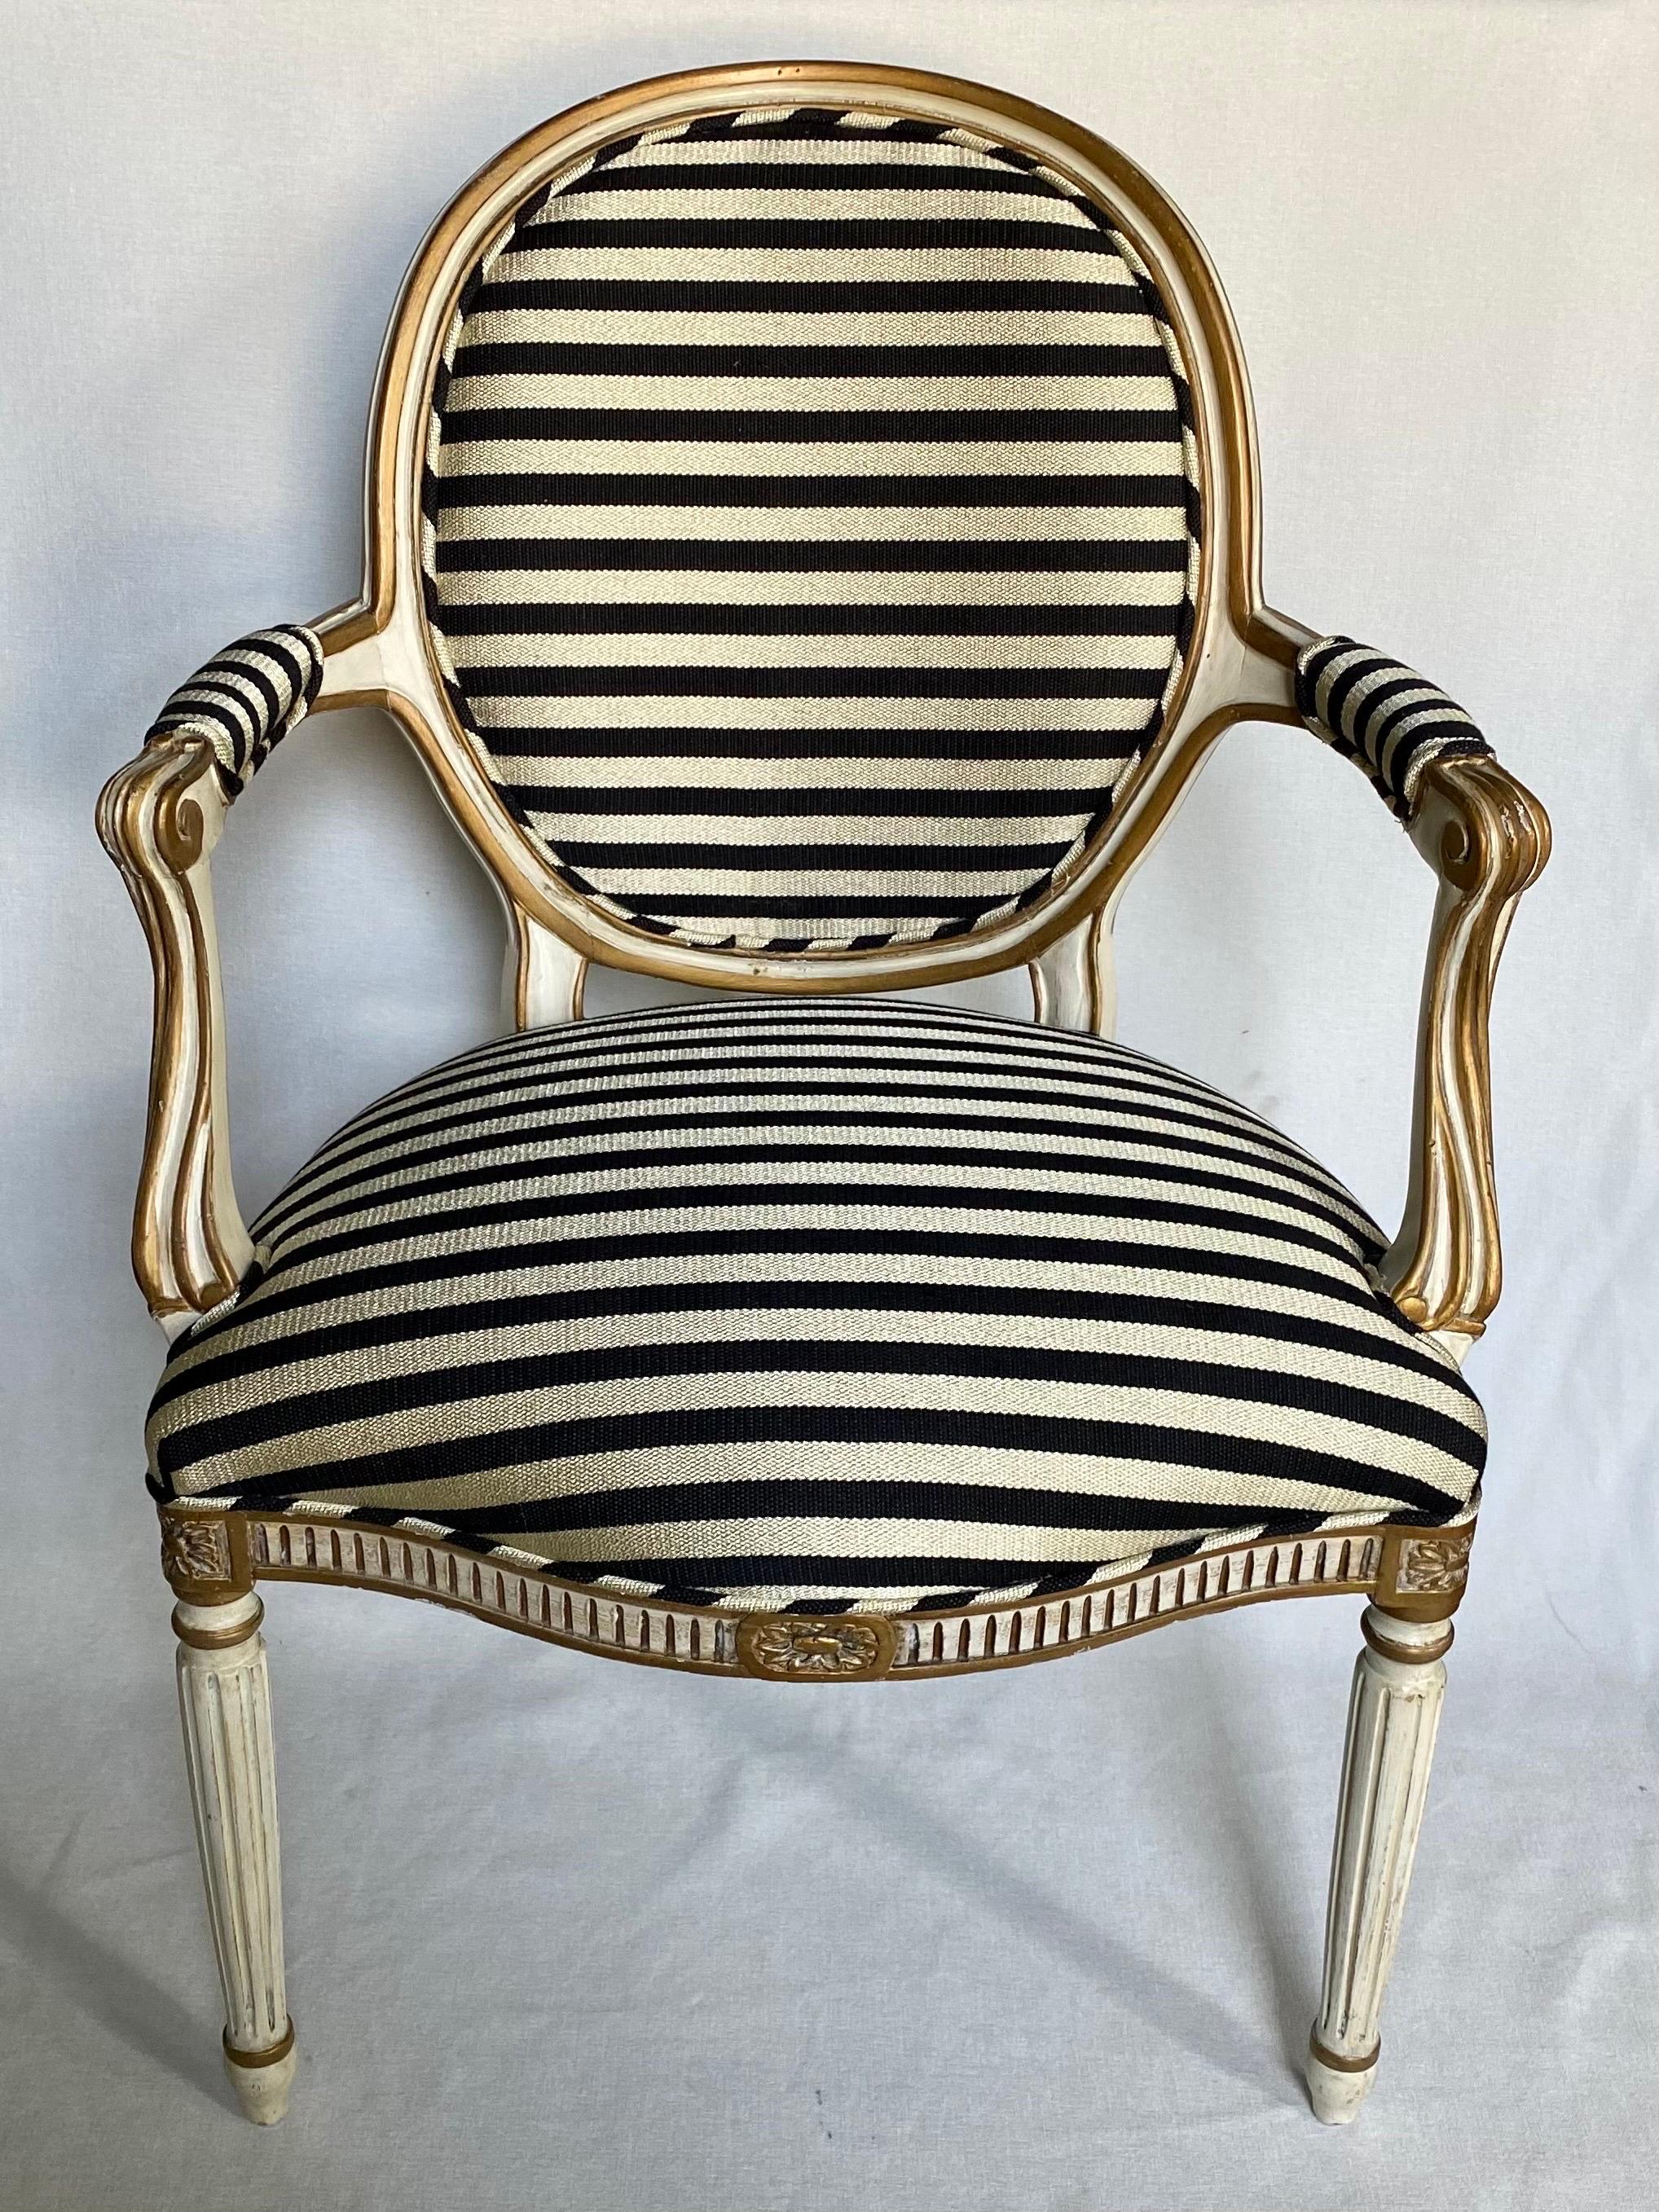 French Louis XVI style cream and gilt painted wood armchair custom upholstered in a fabulous Geoffrey Beene inspired striped fabric by Schumacher. This round back chair features beautifully carved and fluted details with a generous sized seat. The